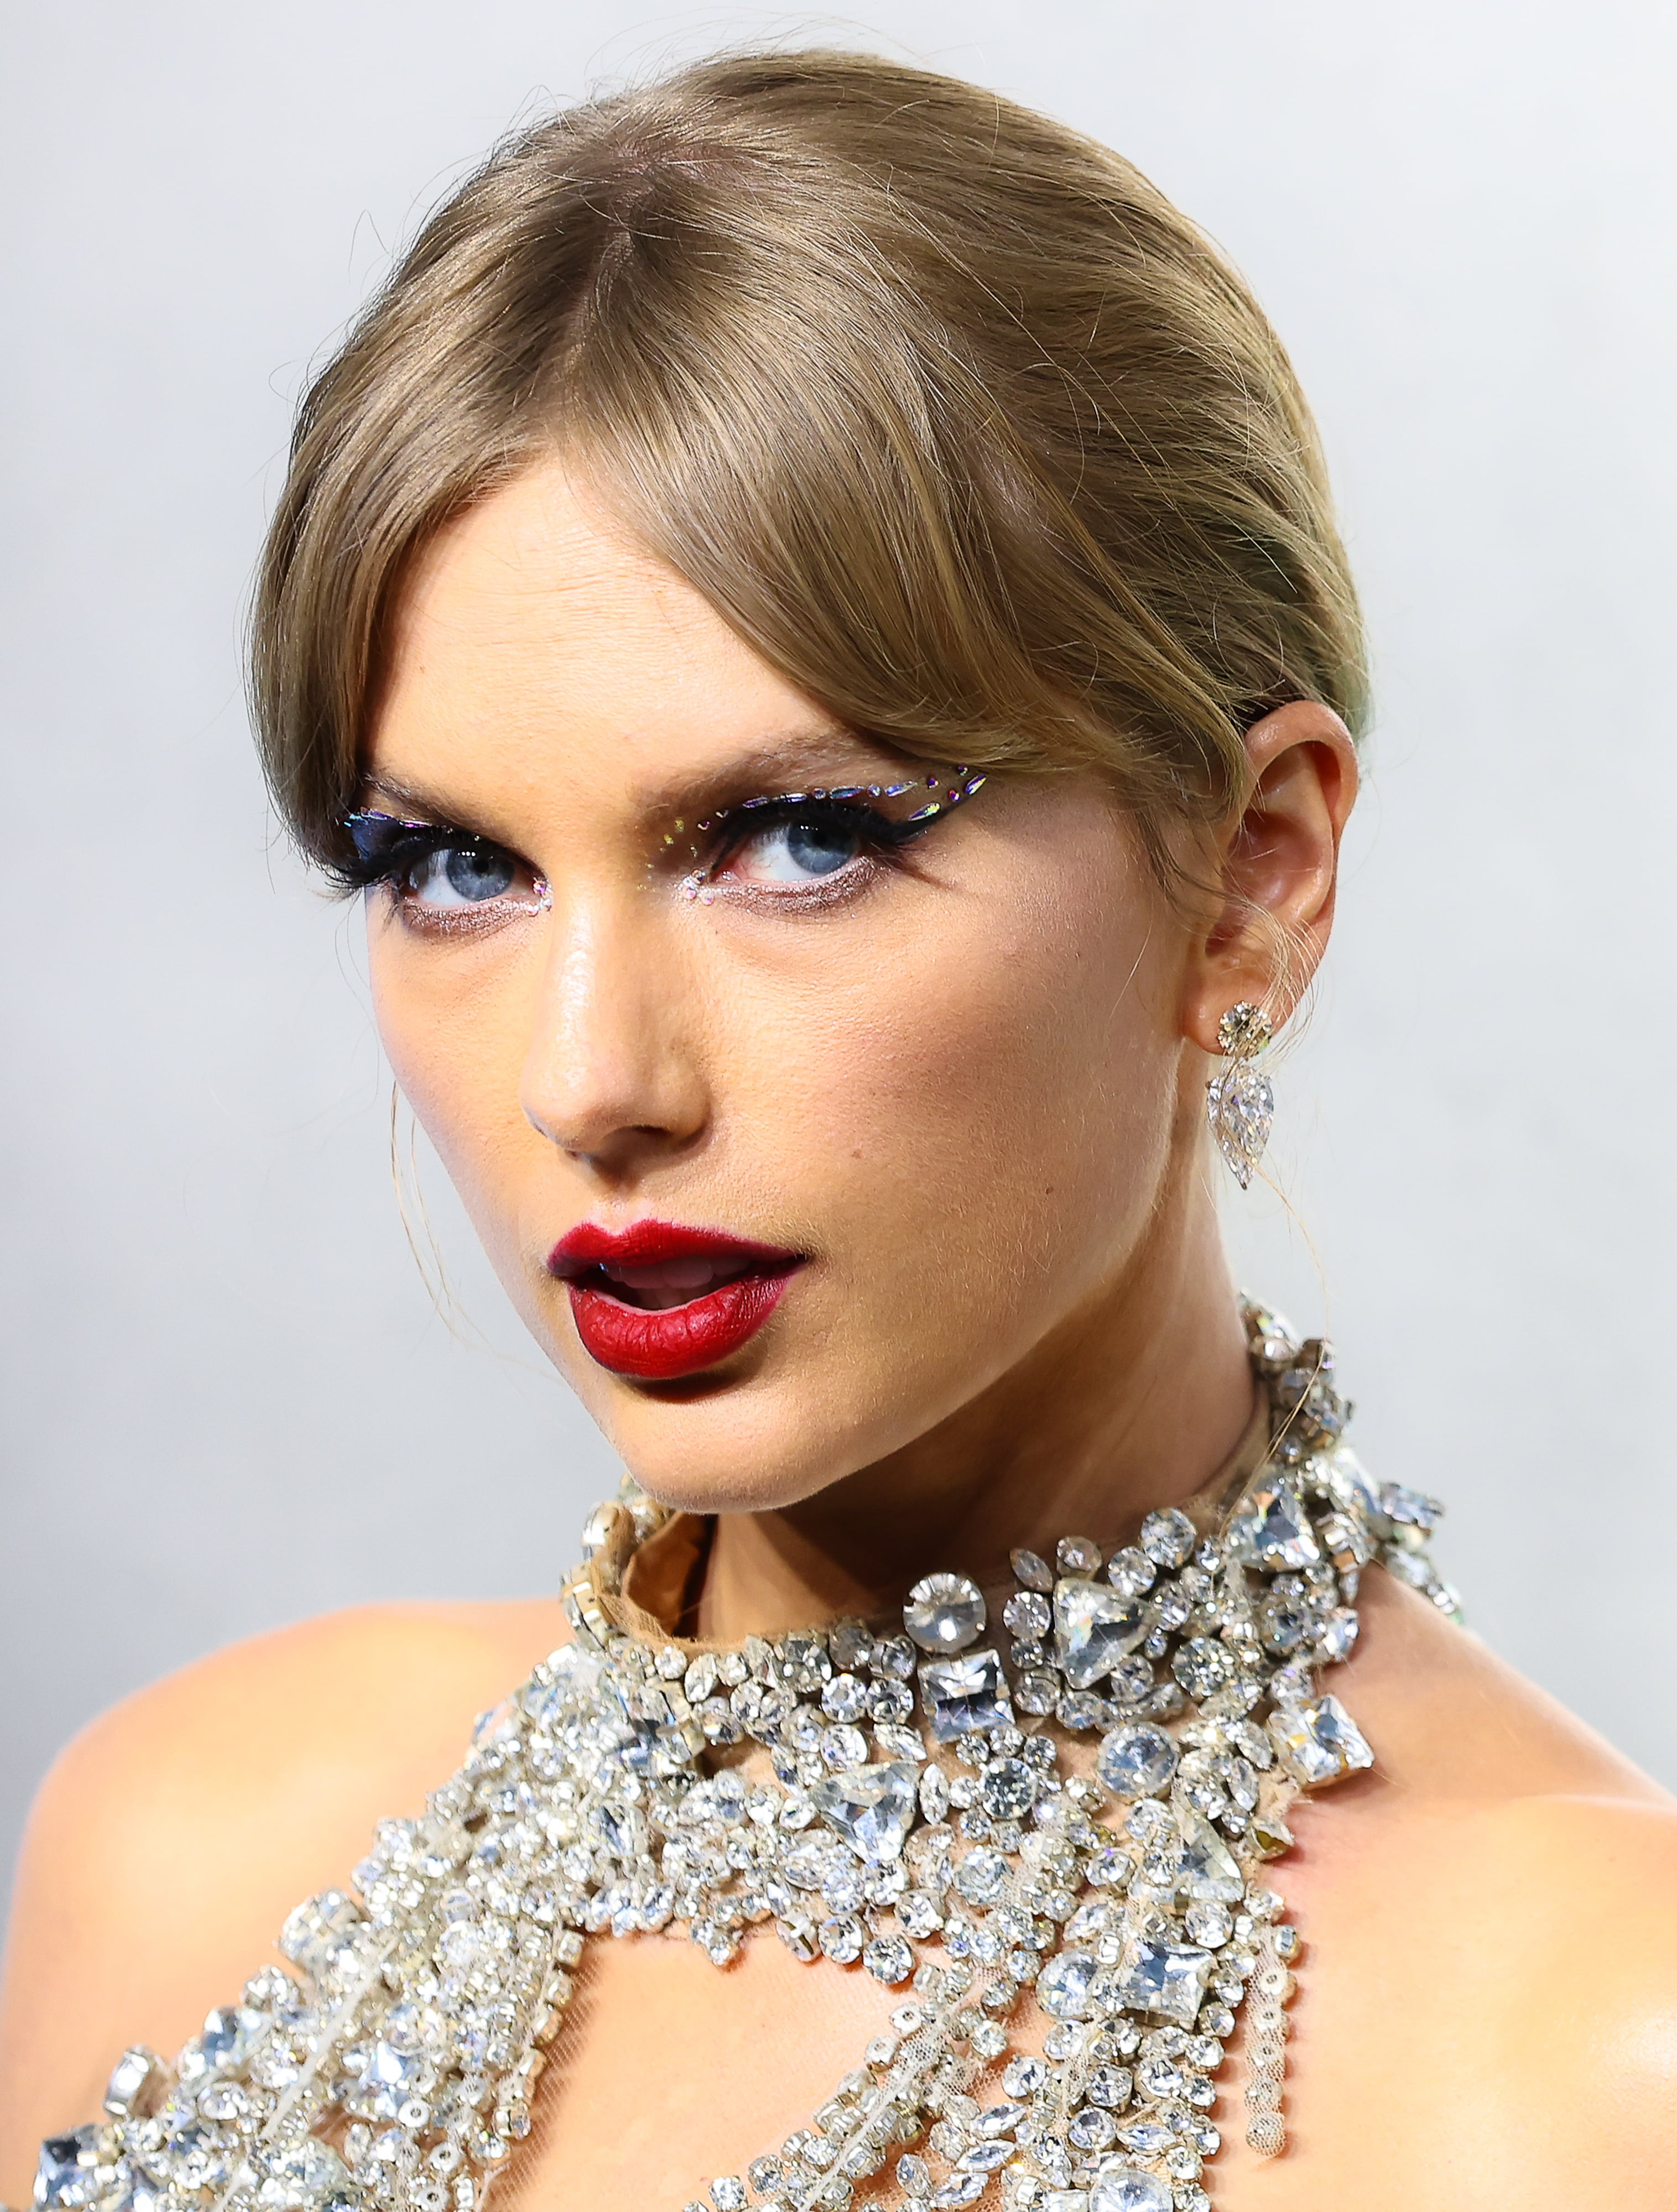 Taylor Swift's Best Hair and Makeup Looks Over the Years